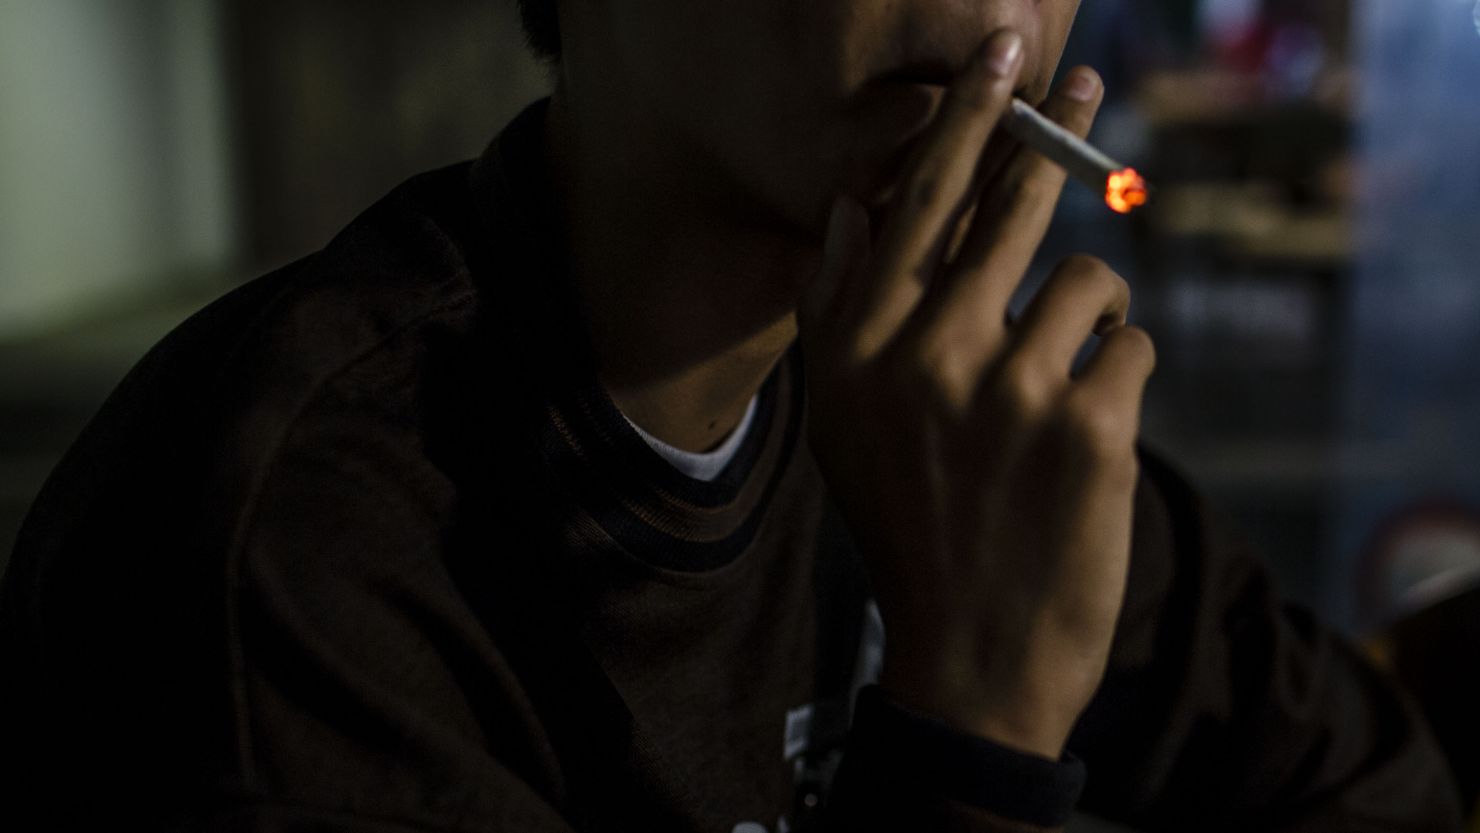 The World Health Organization has identified six of the most effective tobacco control measures, but many countries have not adopted any of them. 